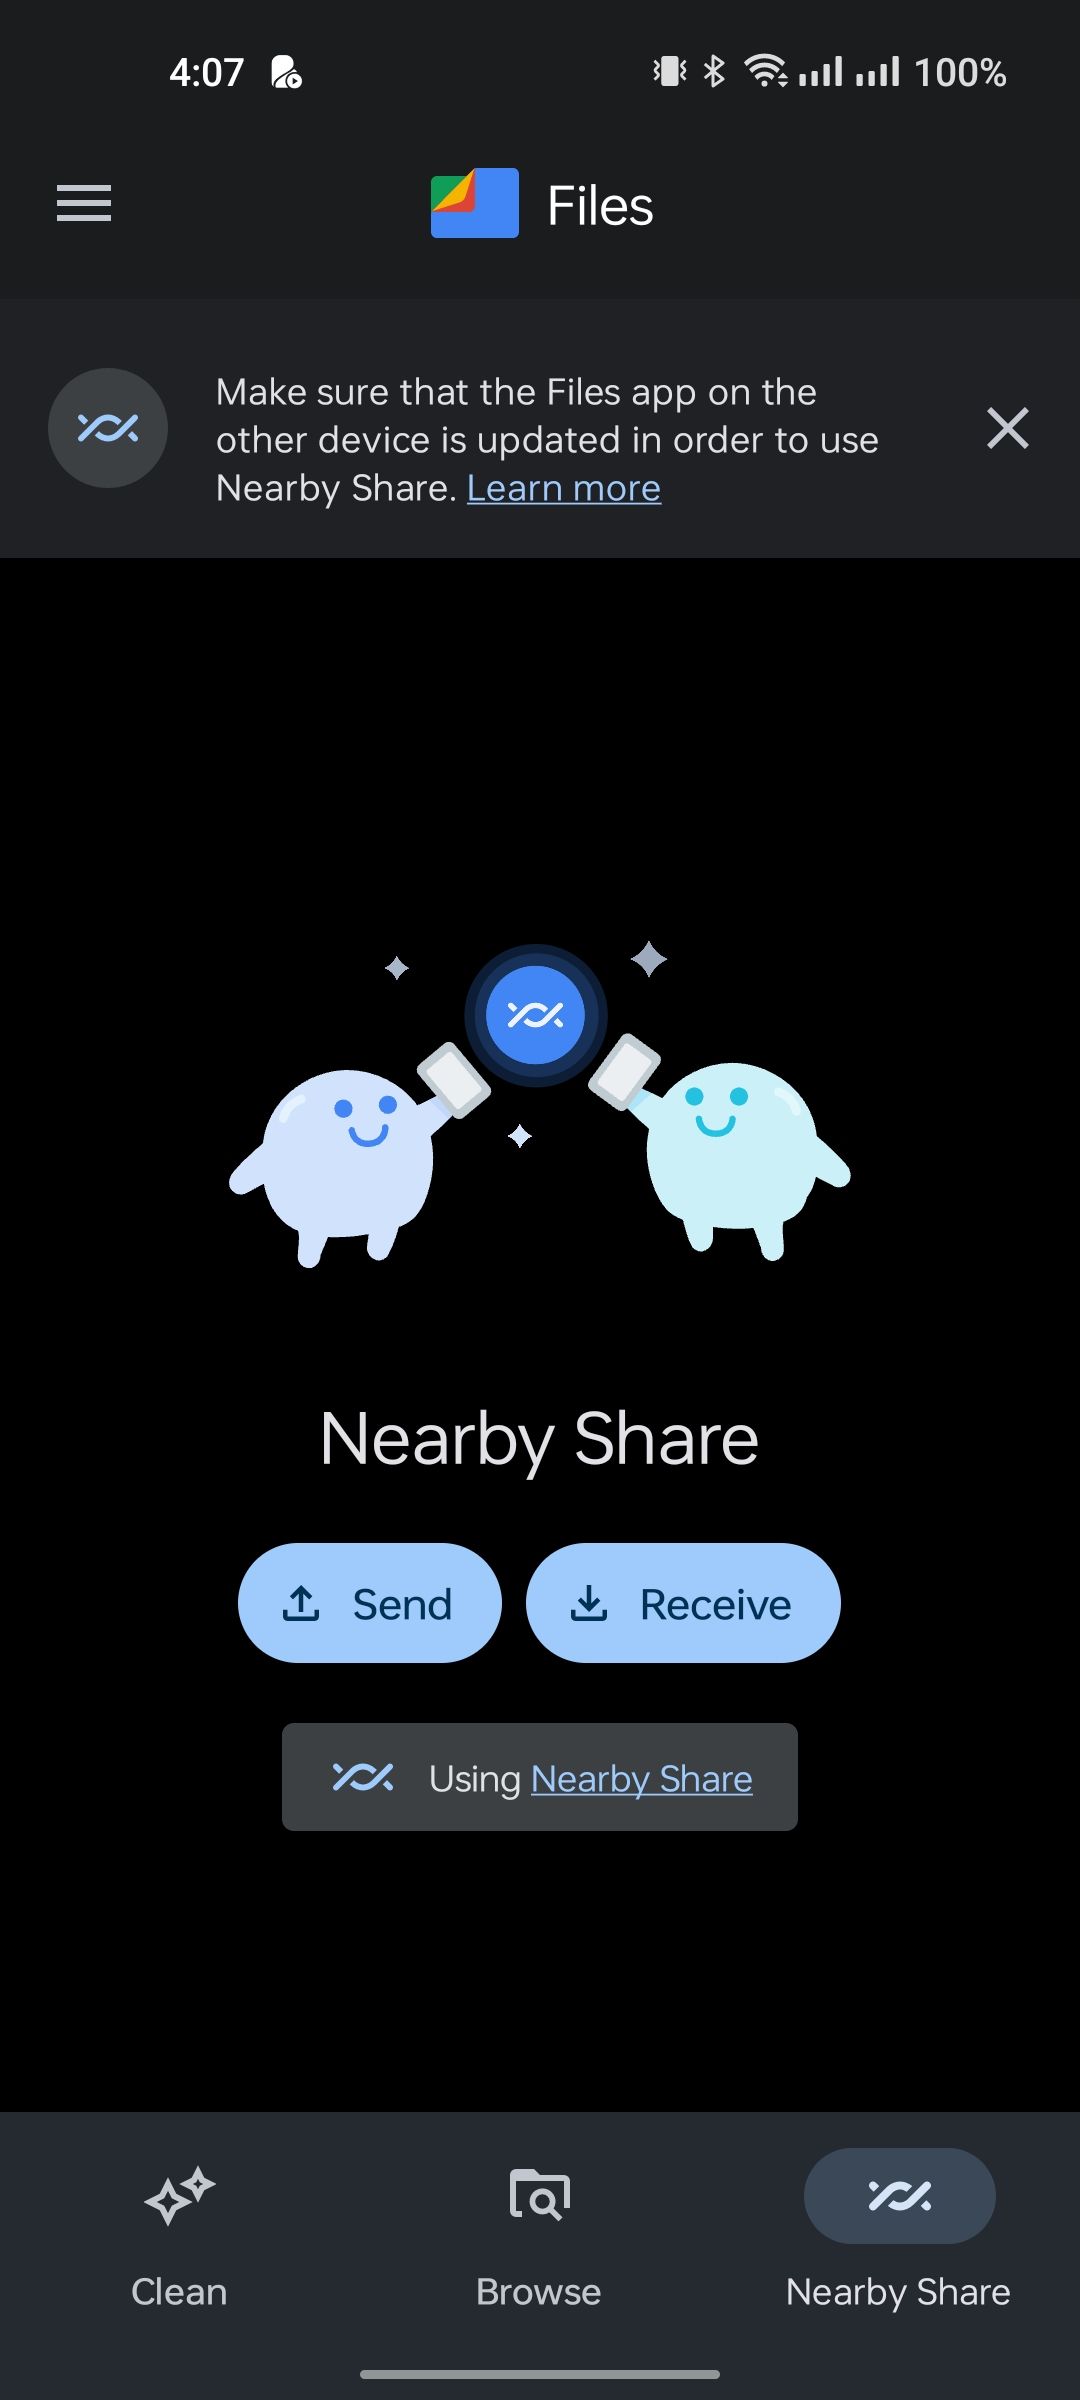 Nearby Share feature on Files by Google